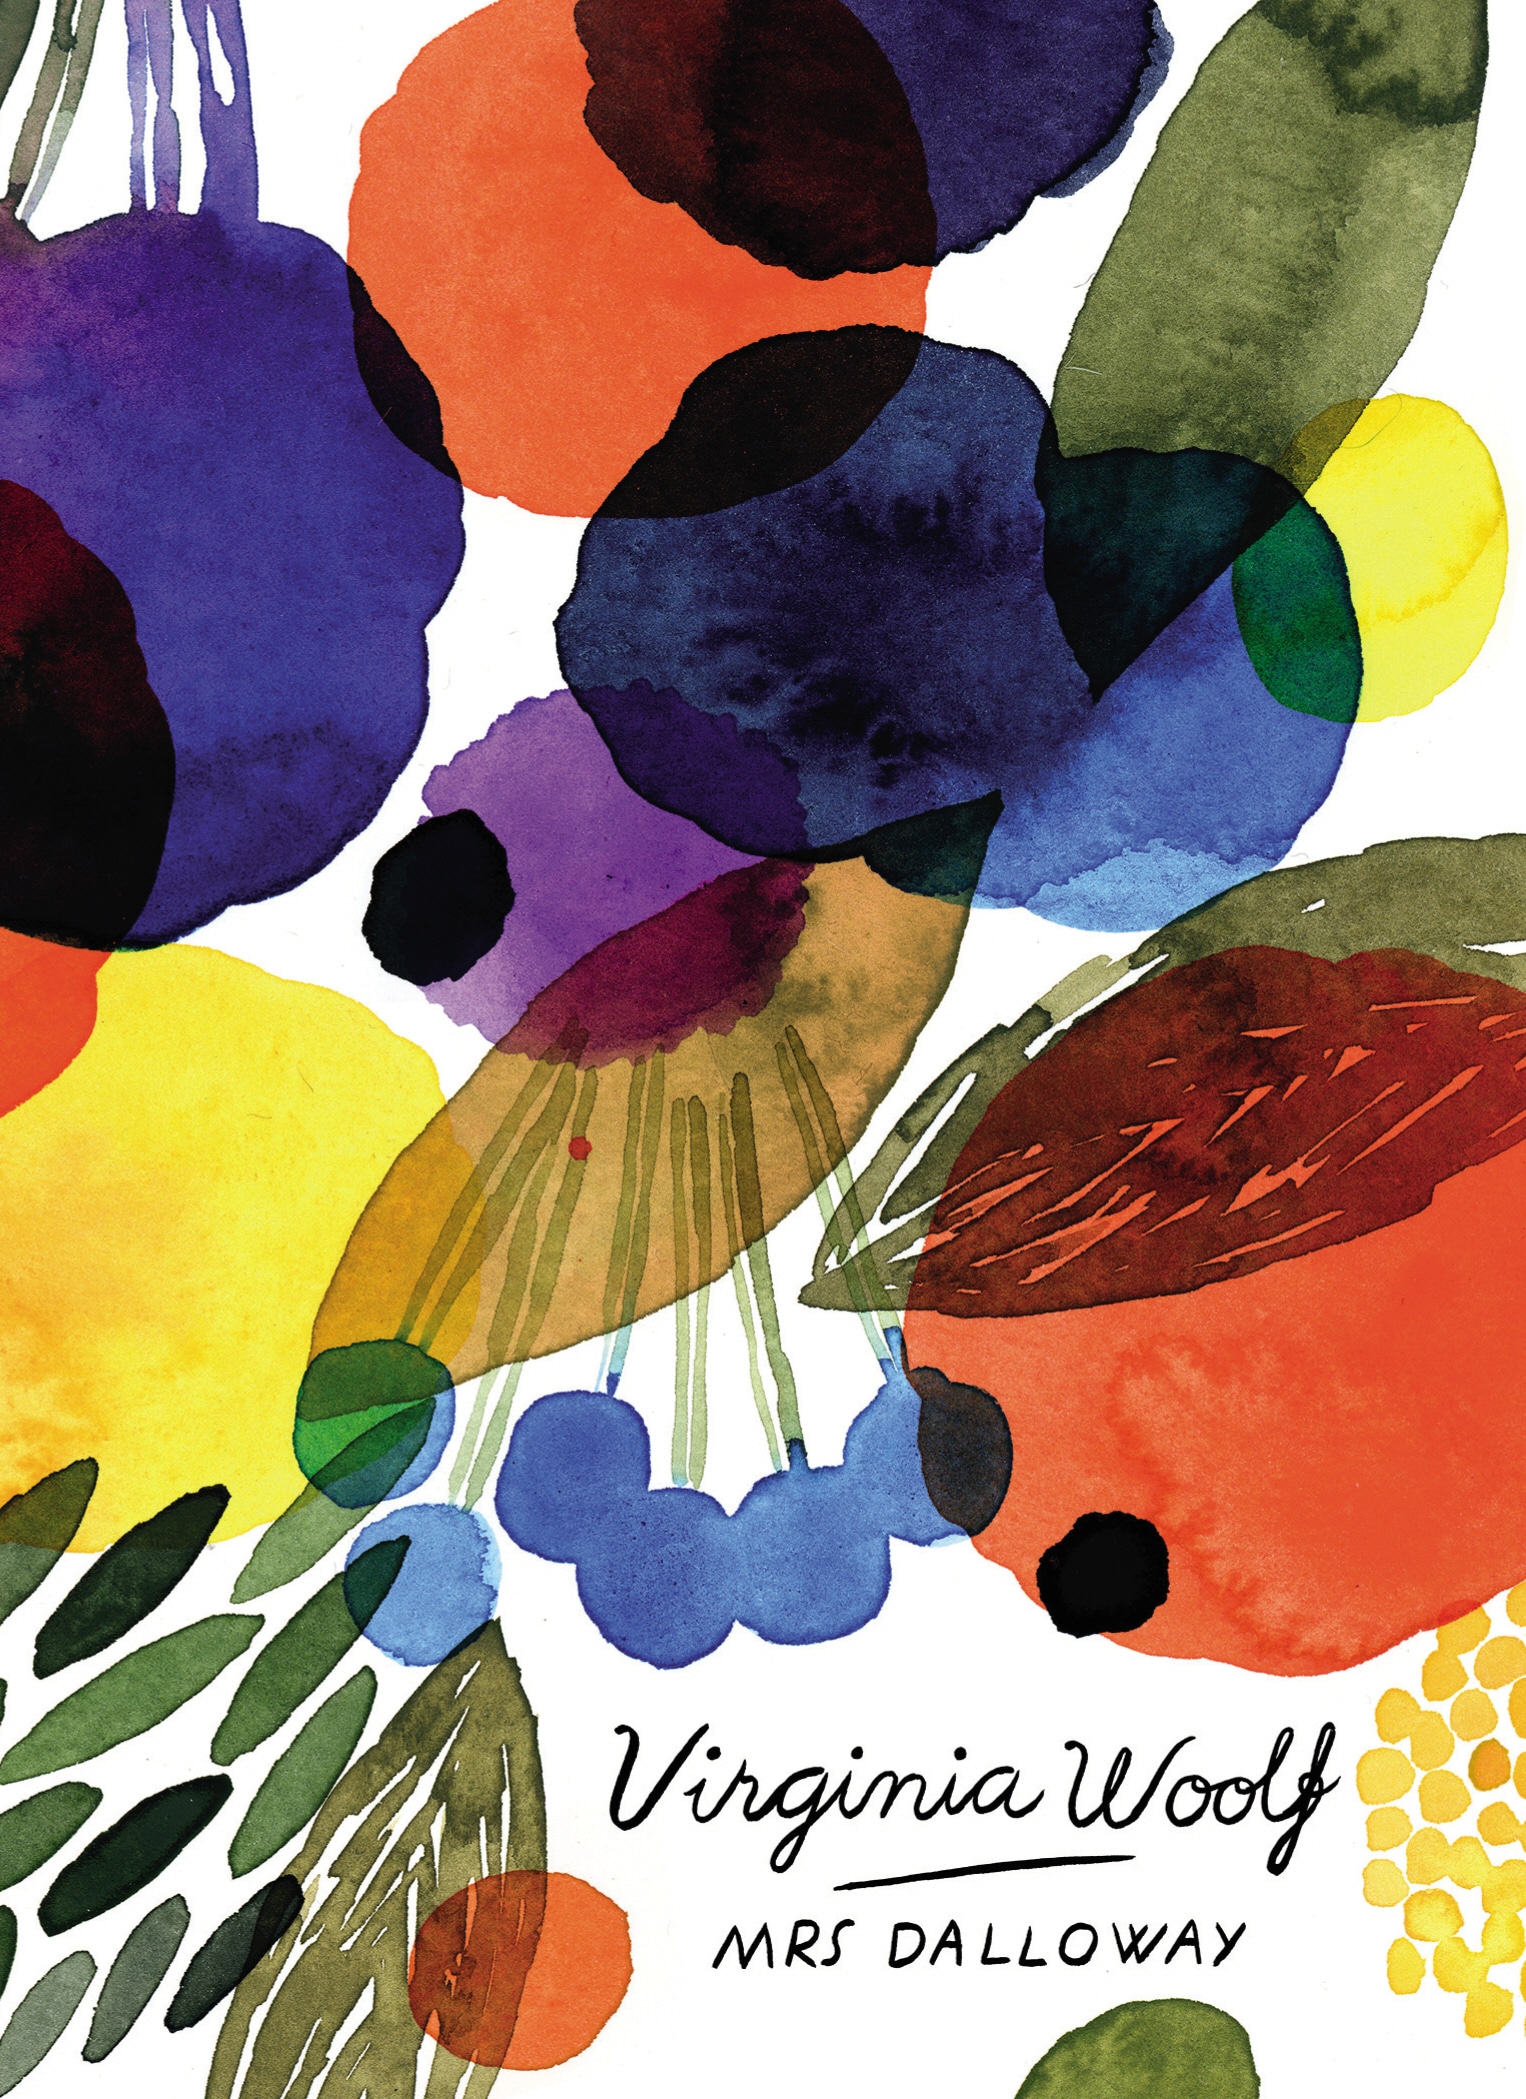 Book “Mrs Dalloway (Vintage Classics Woolf Series)” by Virginia Woolf — October 6, 2016